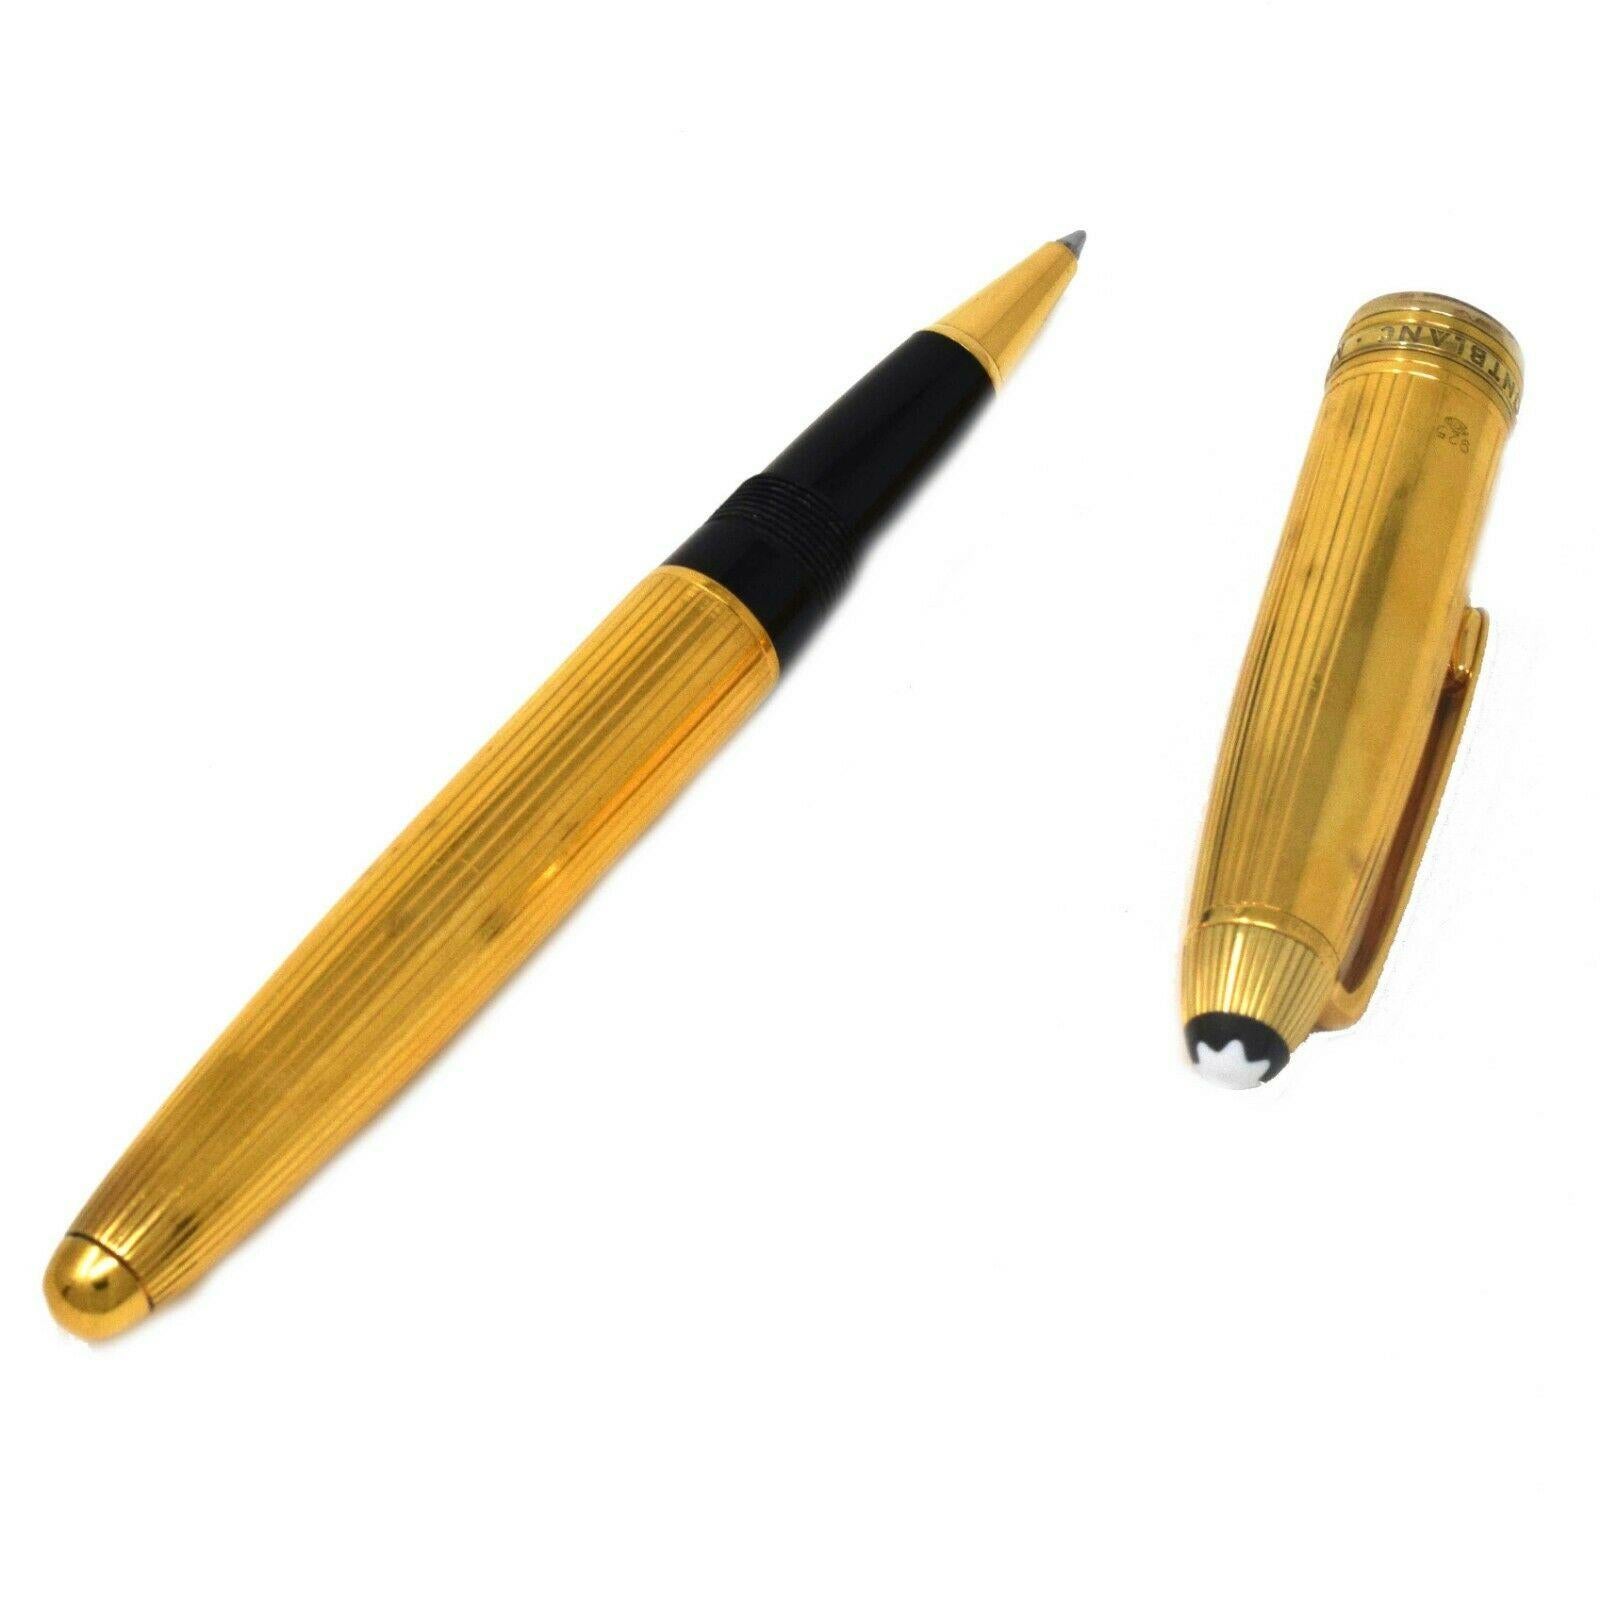 Brilliance Jewels, Miami
Questions? Call Us Anytime!
786,482,8100

Style: Ballpoint Pen

Metal: 18k Yellow Gold-Plated

                925 Sterling Silver​​​​​​​

Pen Length: 14.5 cm

Pen Thickness: 1.25 cm

Signature: MONTBLANC, MEISTERSTRUCK,